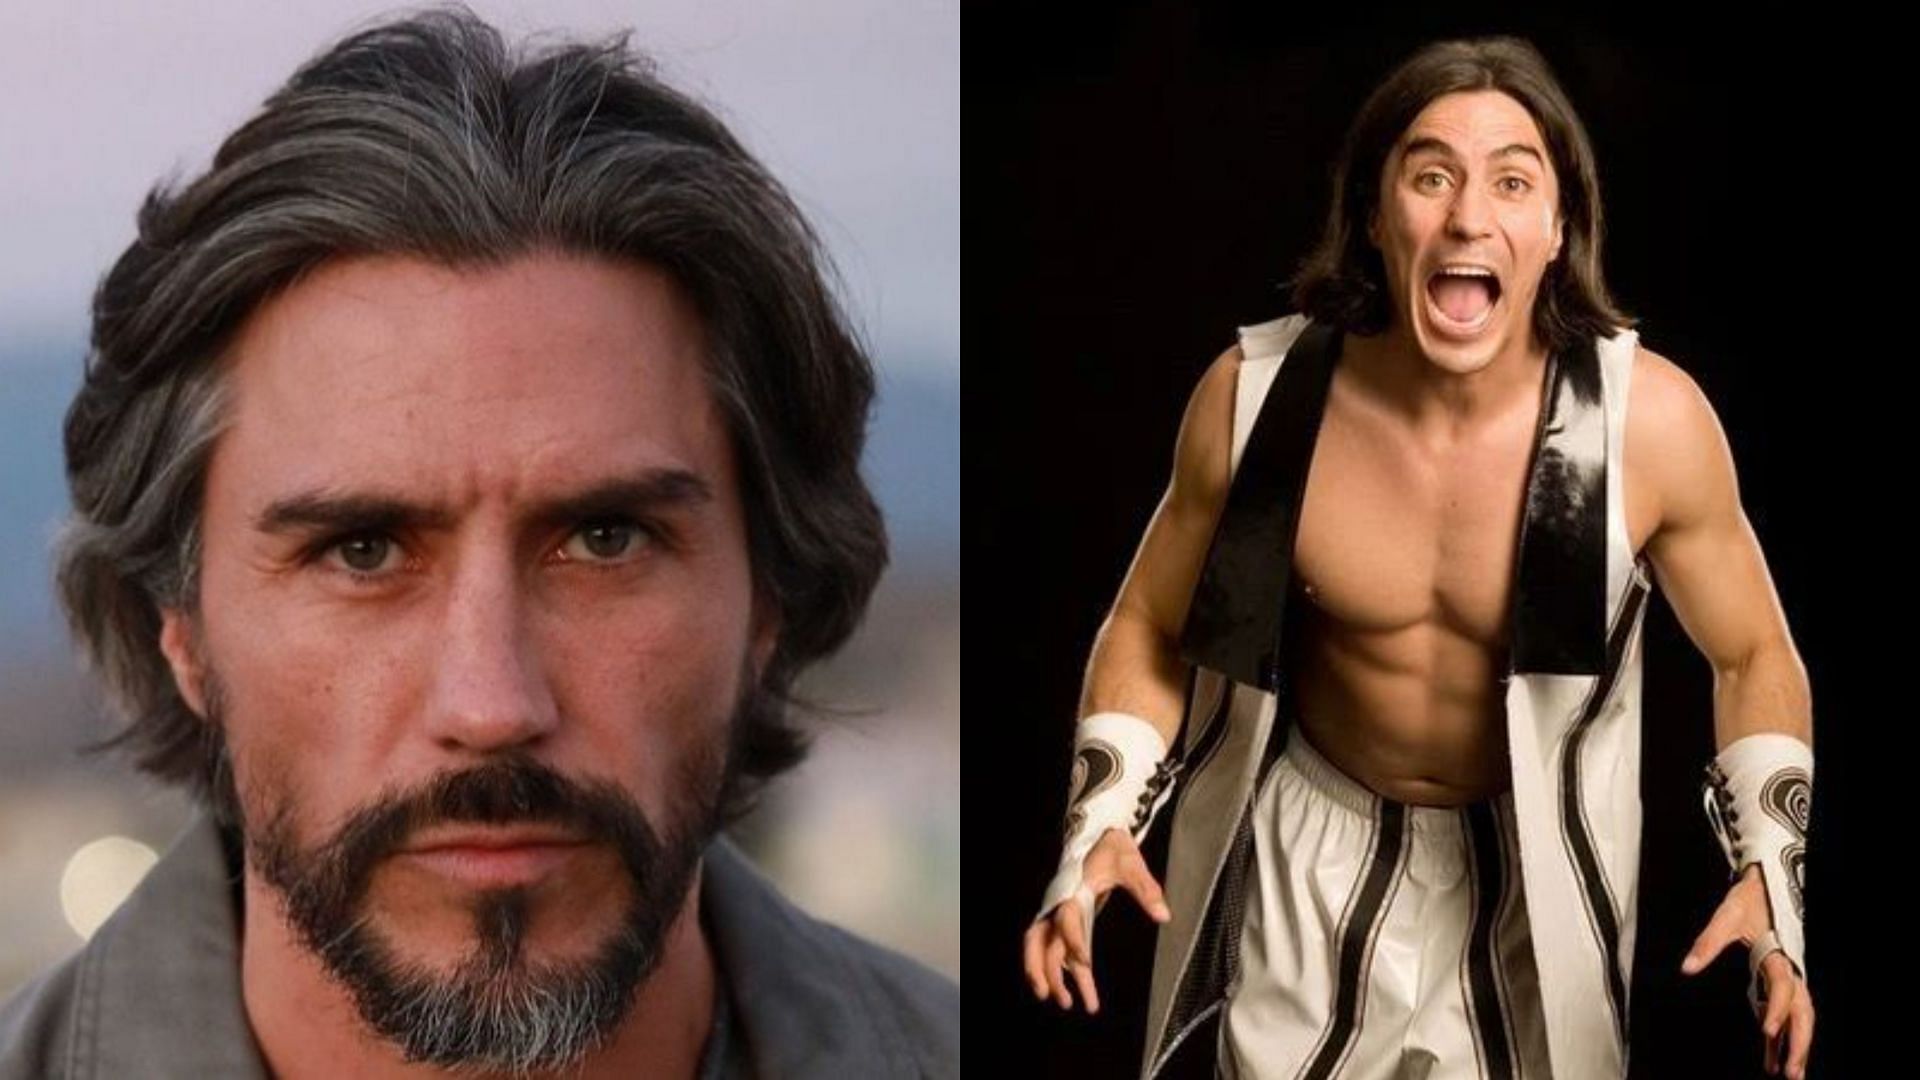 Paul London retired from wrestling to pursue an acting career